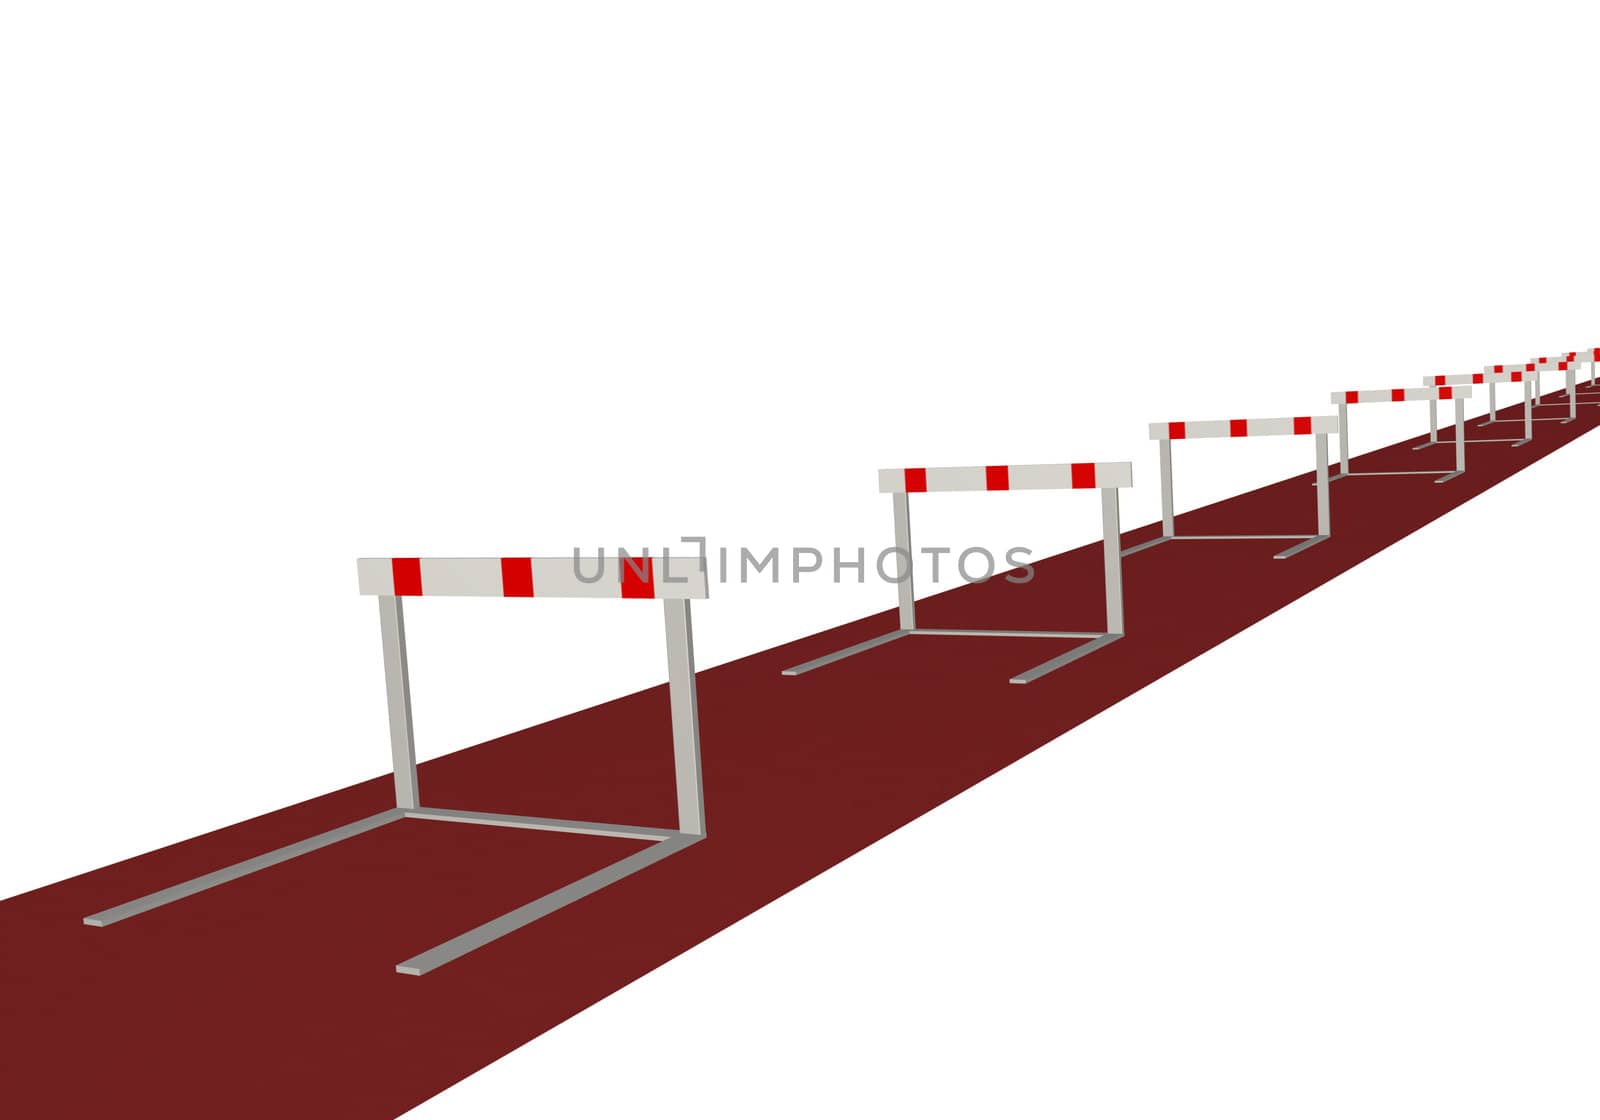 Image of many hurtles on a track isolated on a white background.